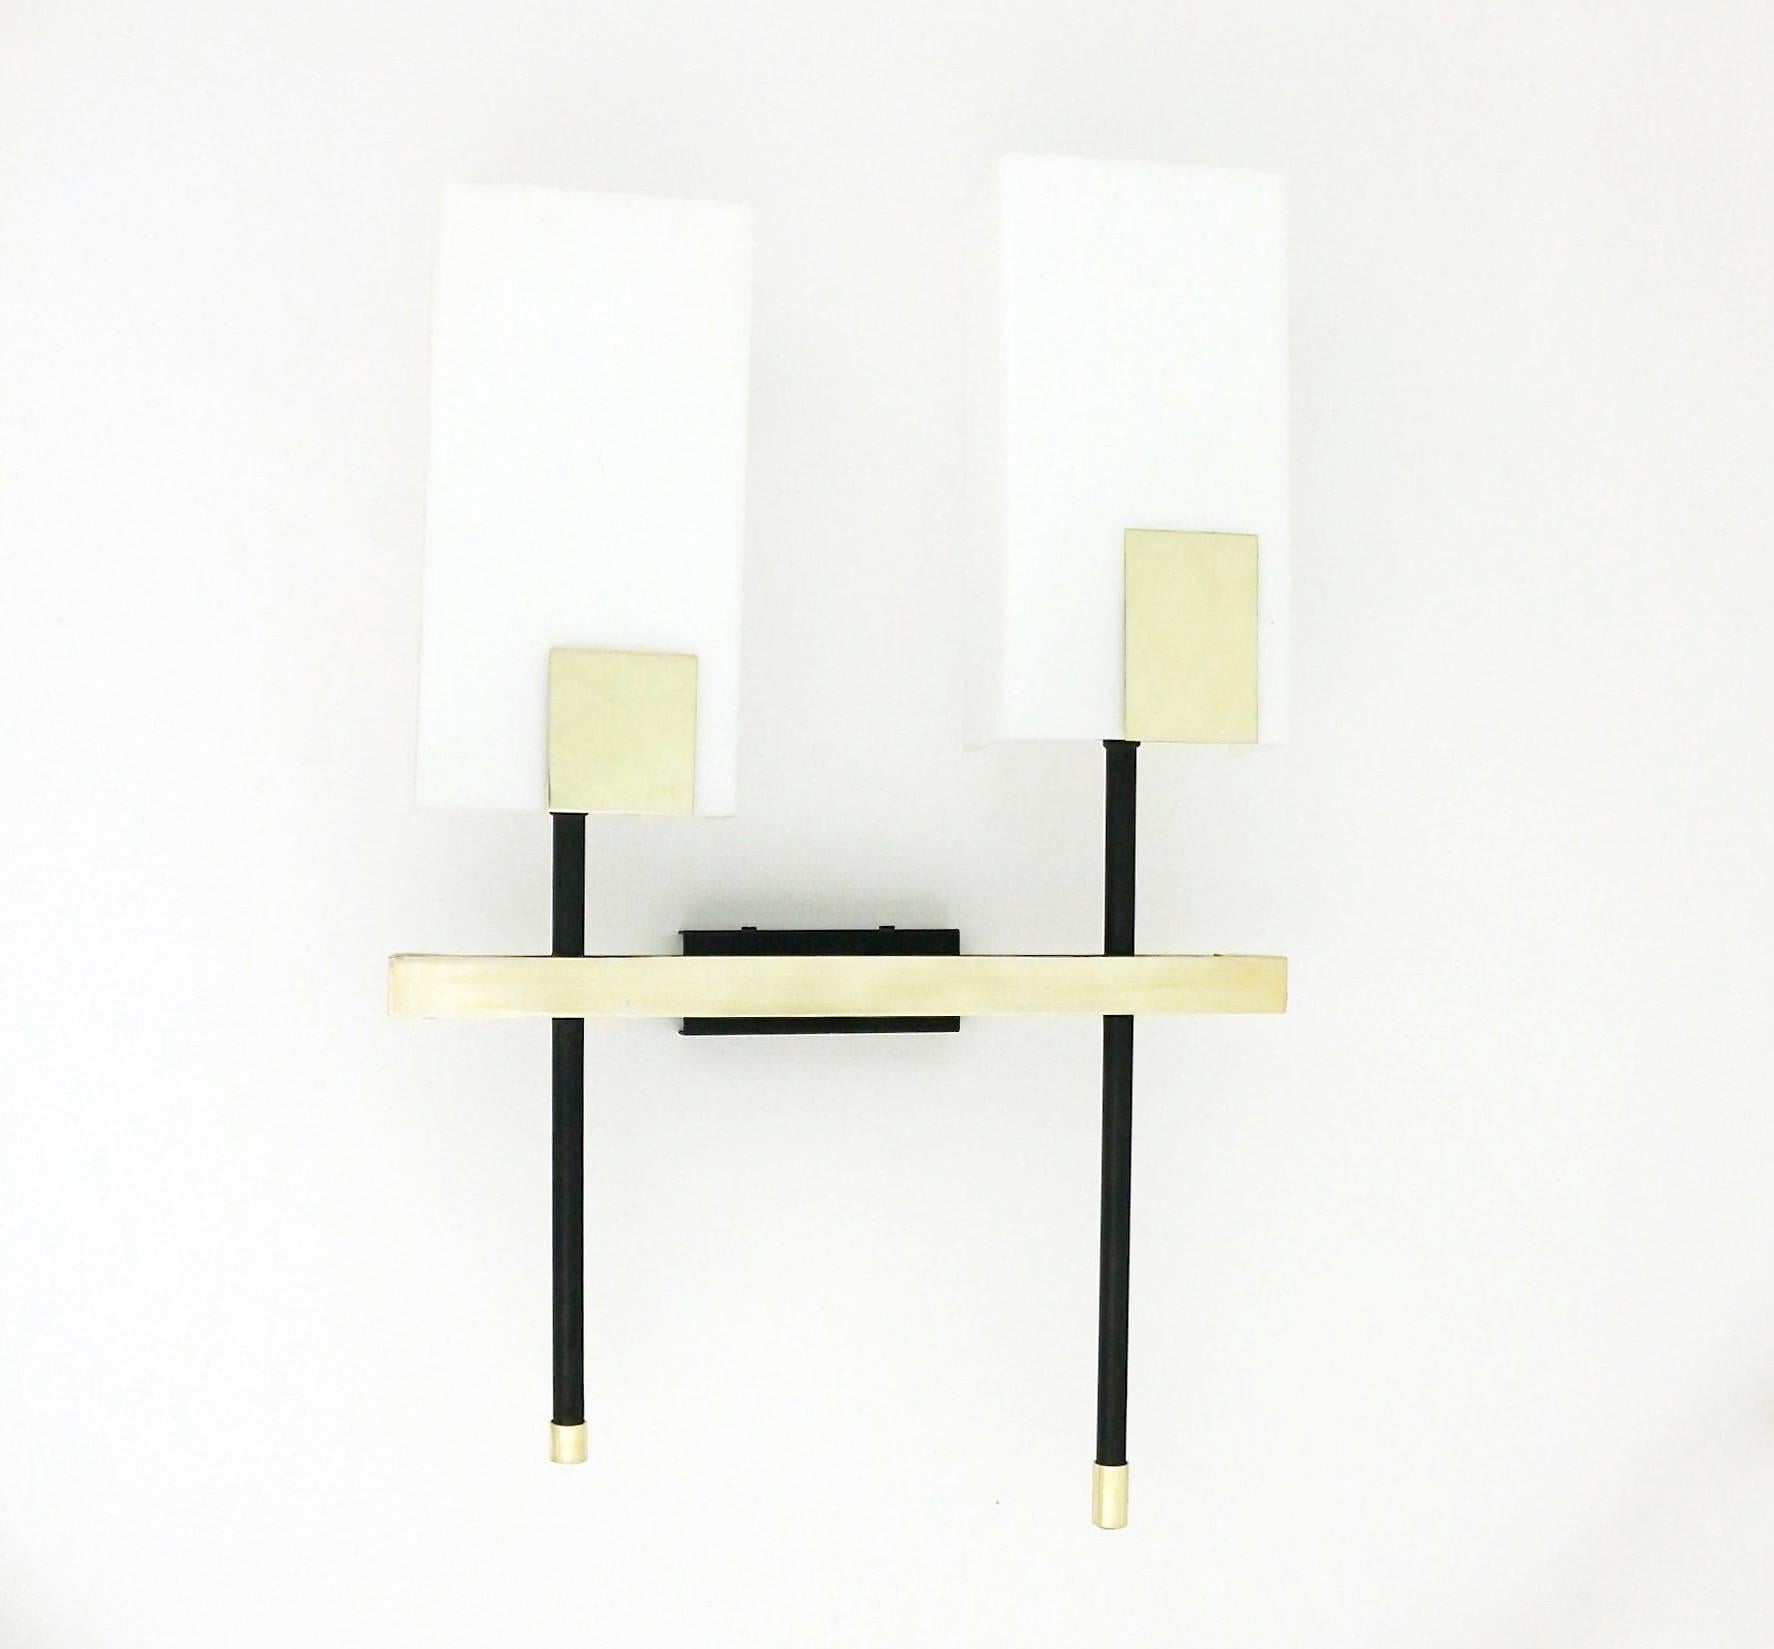 Pair of 1950s asymmetrical sconces by Maison Arlus. 

Composed by two black lacquered stems adorned with rectangular brass plates, mounted on brass crossbar.
Lampshade in white perspex.
 
Two lighted arms per sconce. Wired and in working